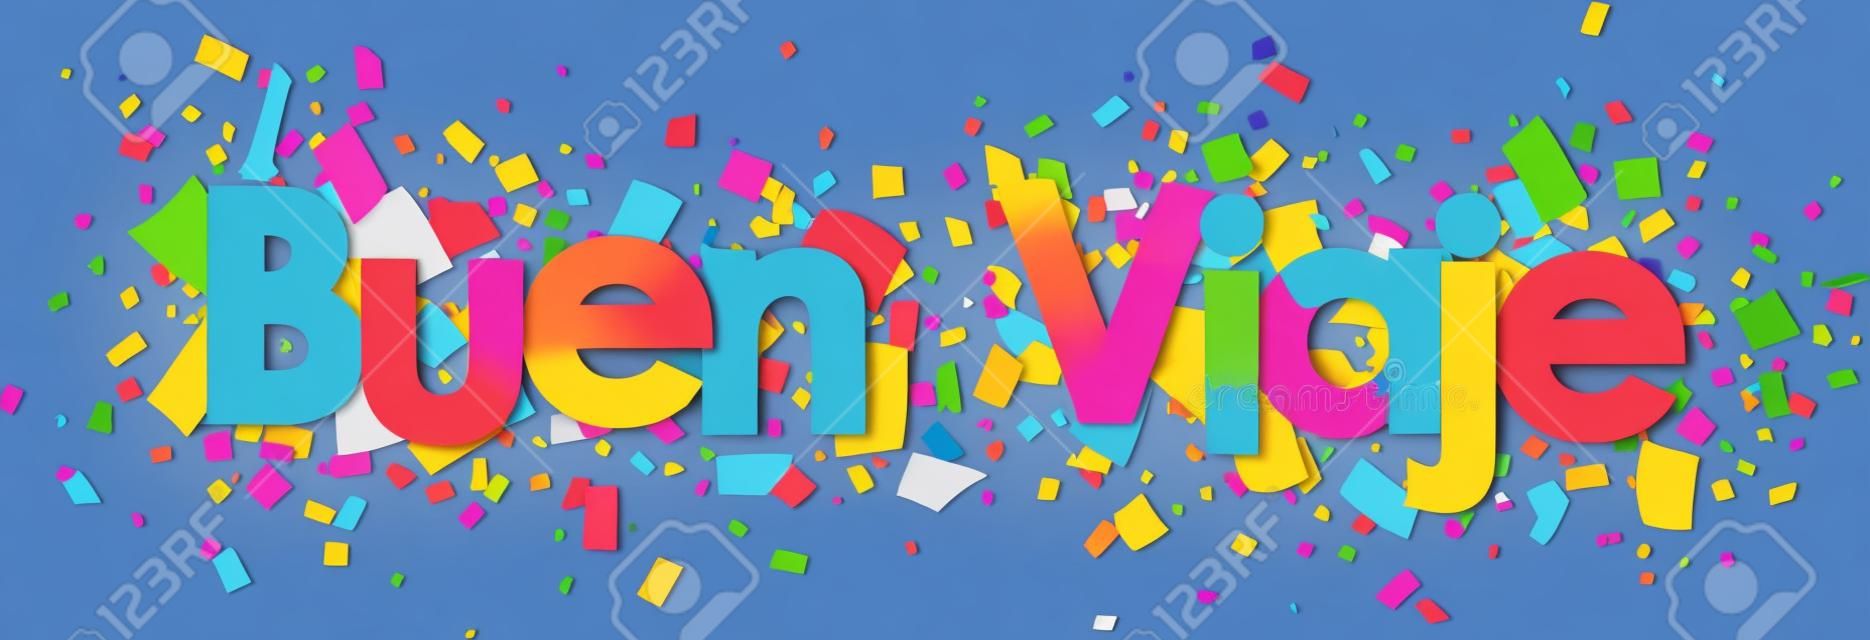 Have a nice trip paper banner with color confetti, Spanish. Vector illustration.